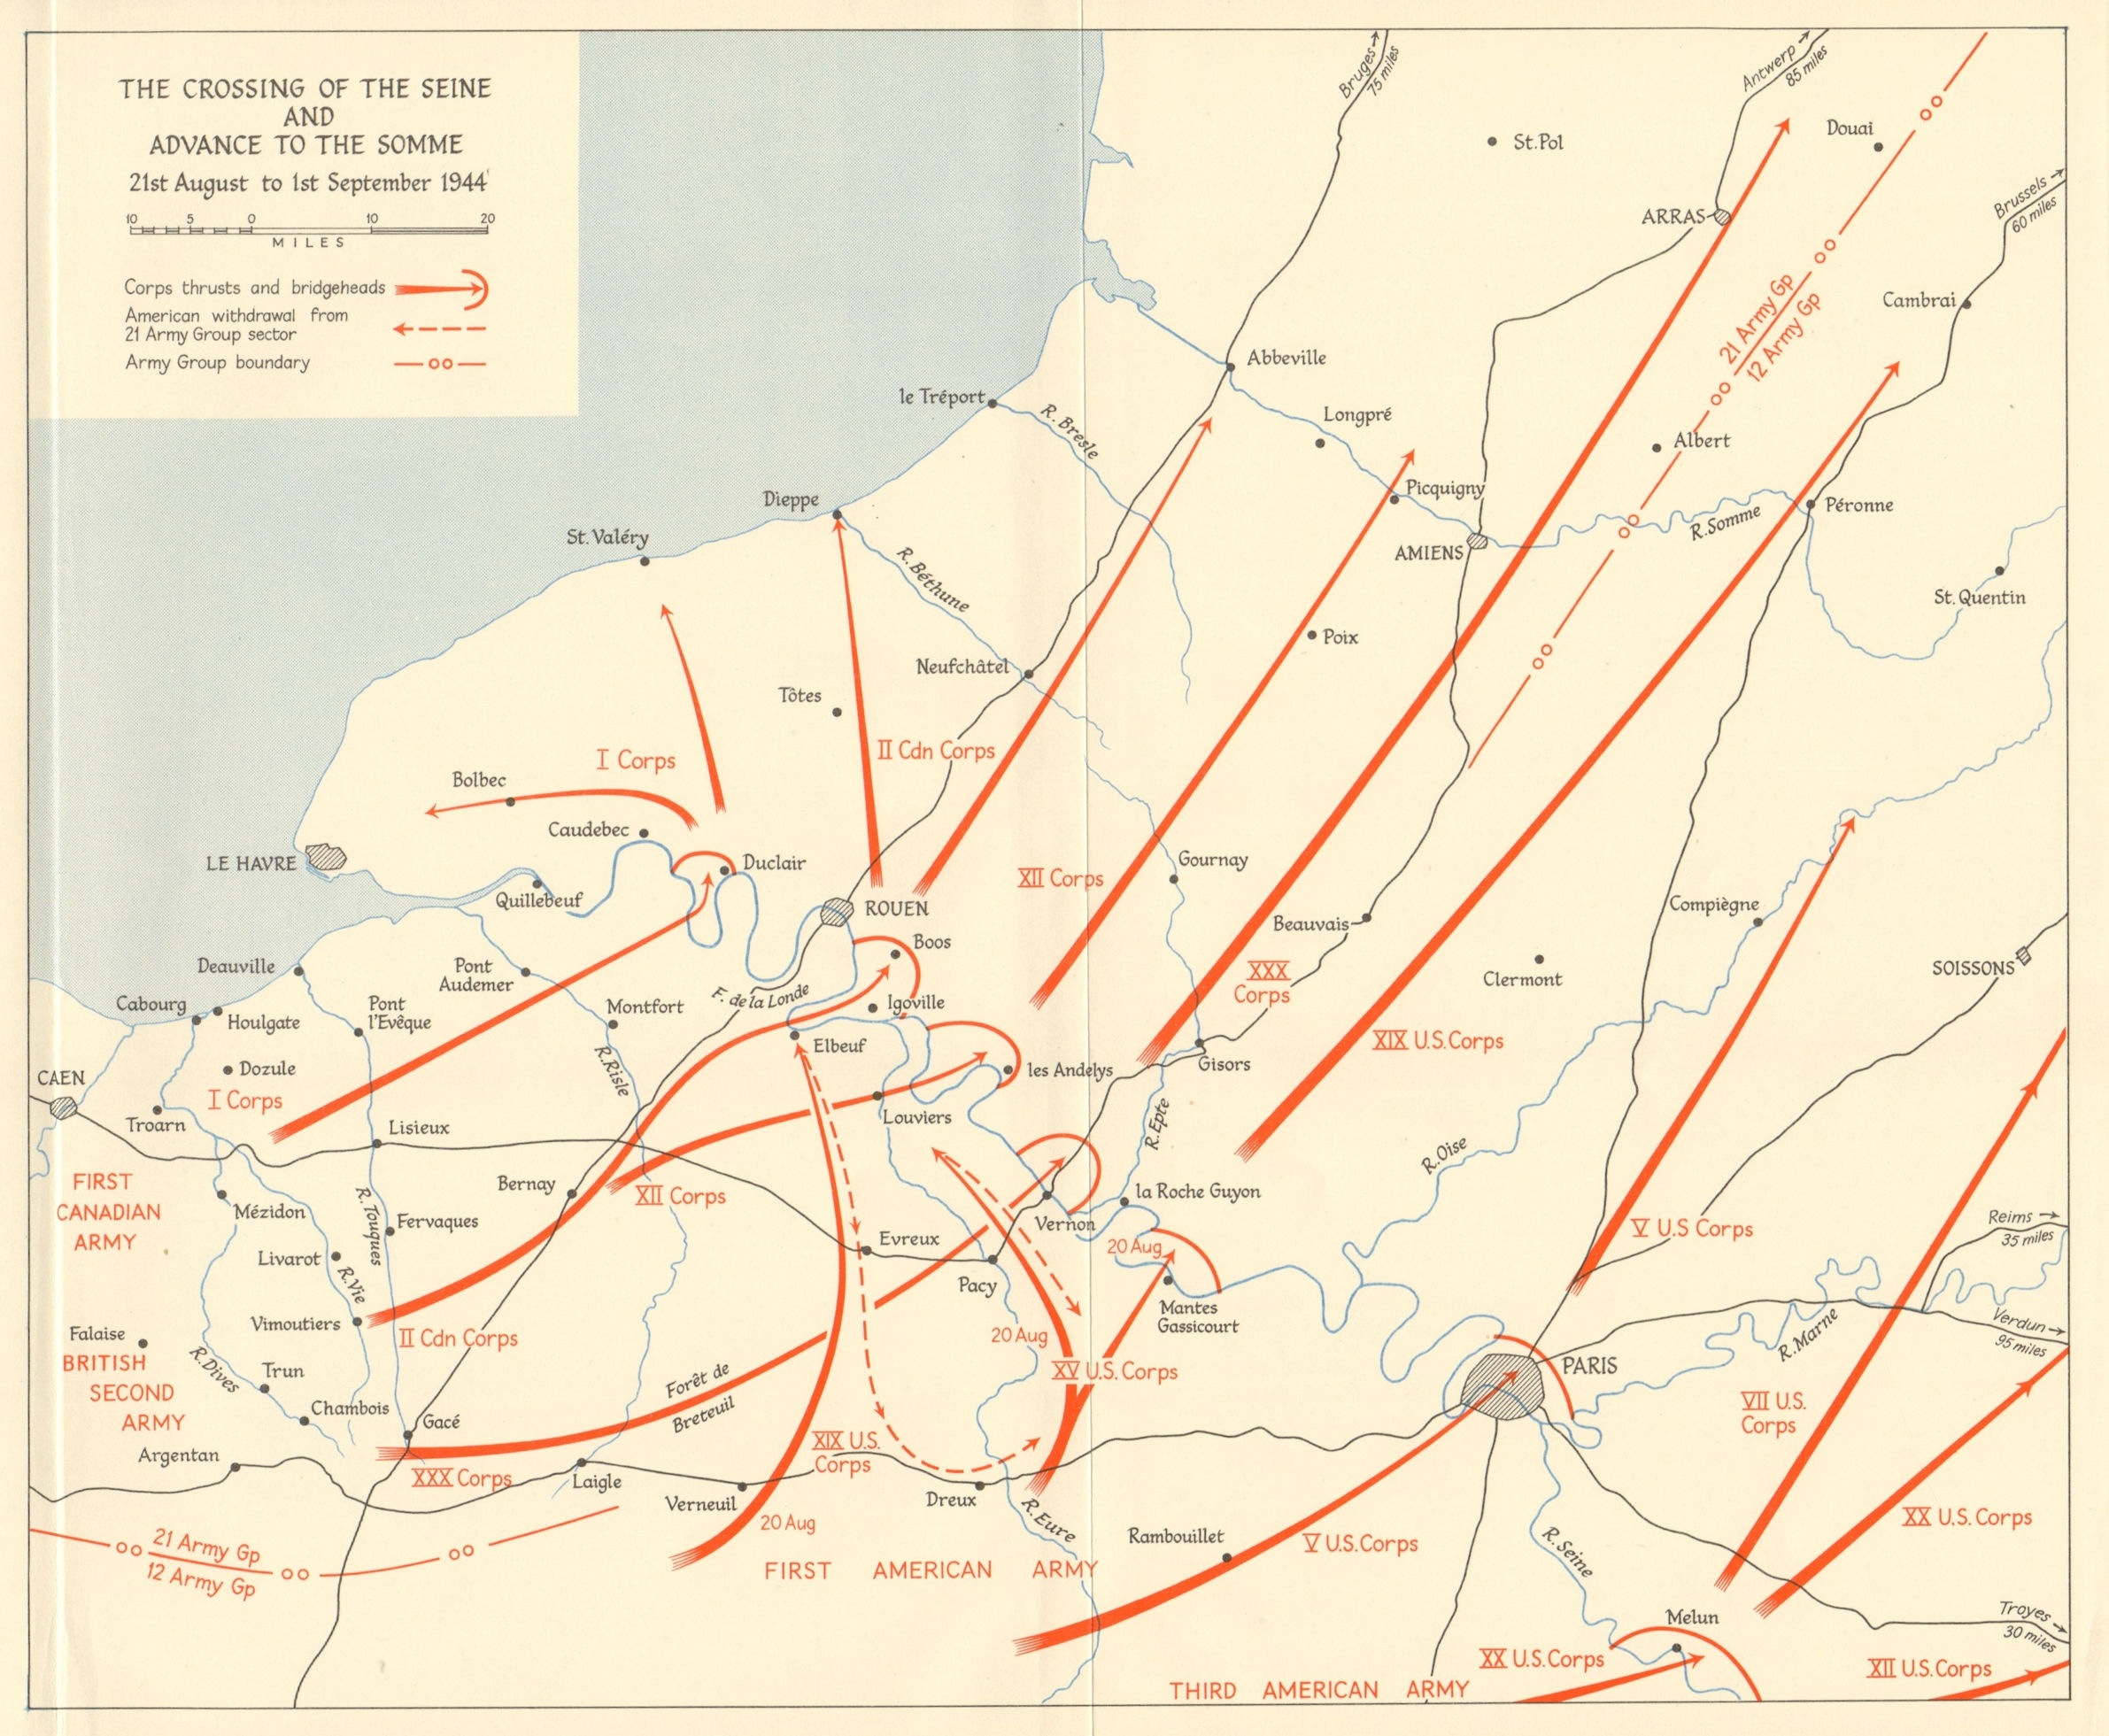 Overlord Normandy Crossing Seine Advance to Somme 21 Aug-1 Sept 1944 1962 map